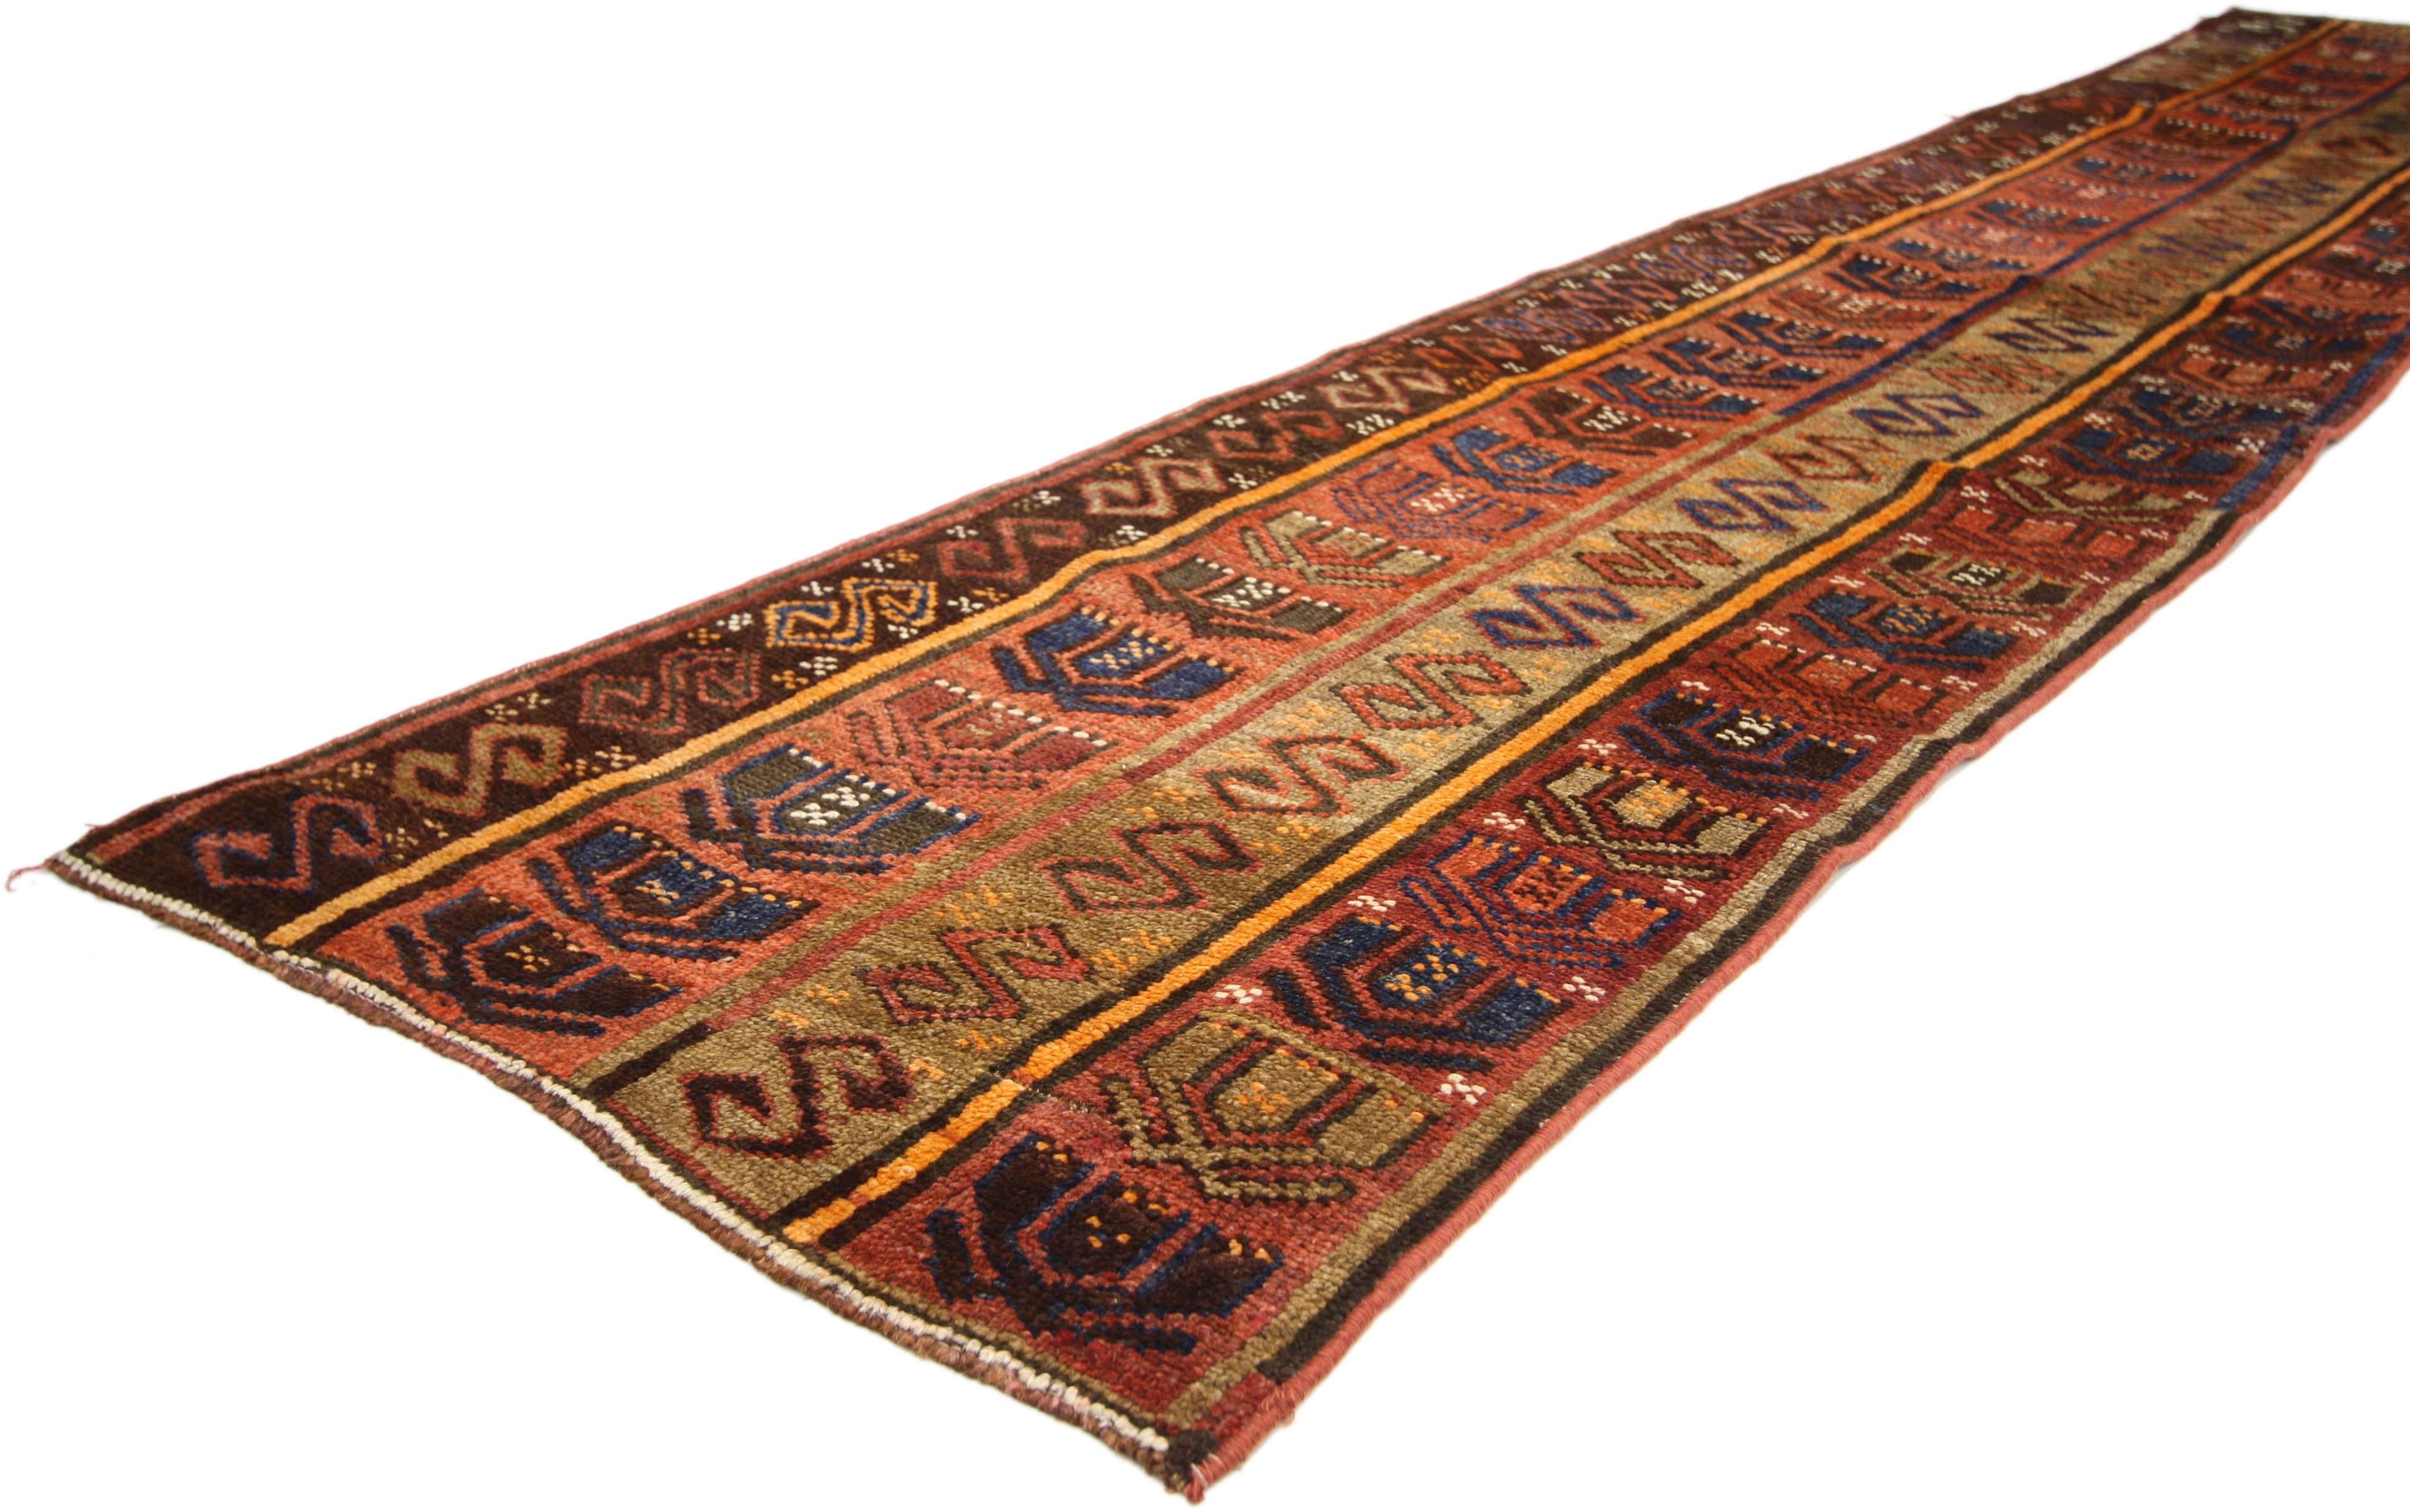 51712 Rustic Tribal Style Vintage Turkish Oushak Runner, Narrow Hallway Runner. Decidedly tribal and luxuriously mystical, this hand knotted wool vintage Turkish Oushak hallway runner features ancient symbolism in a repeat pattern along its length.